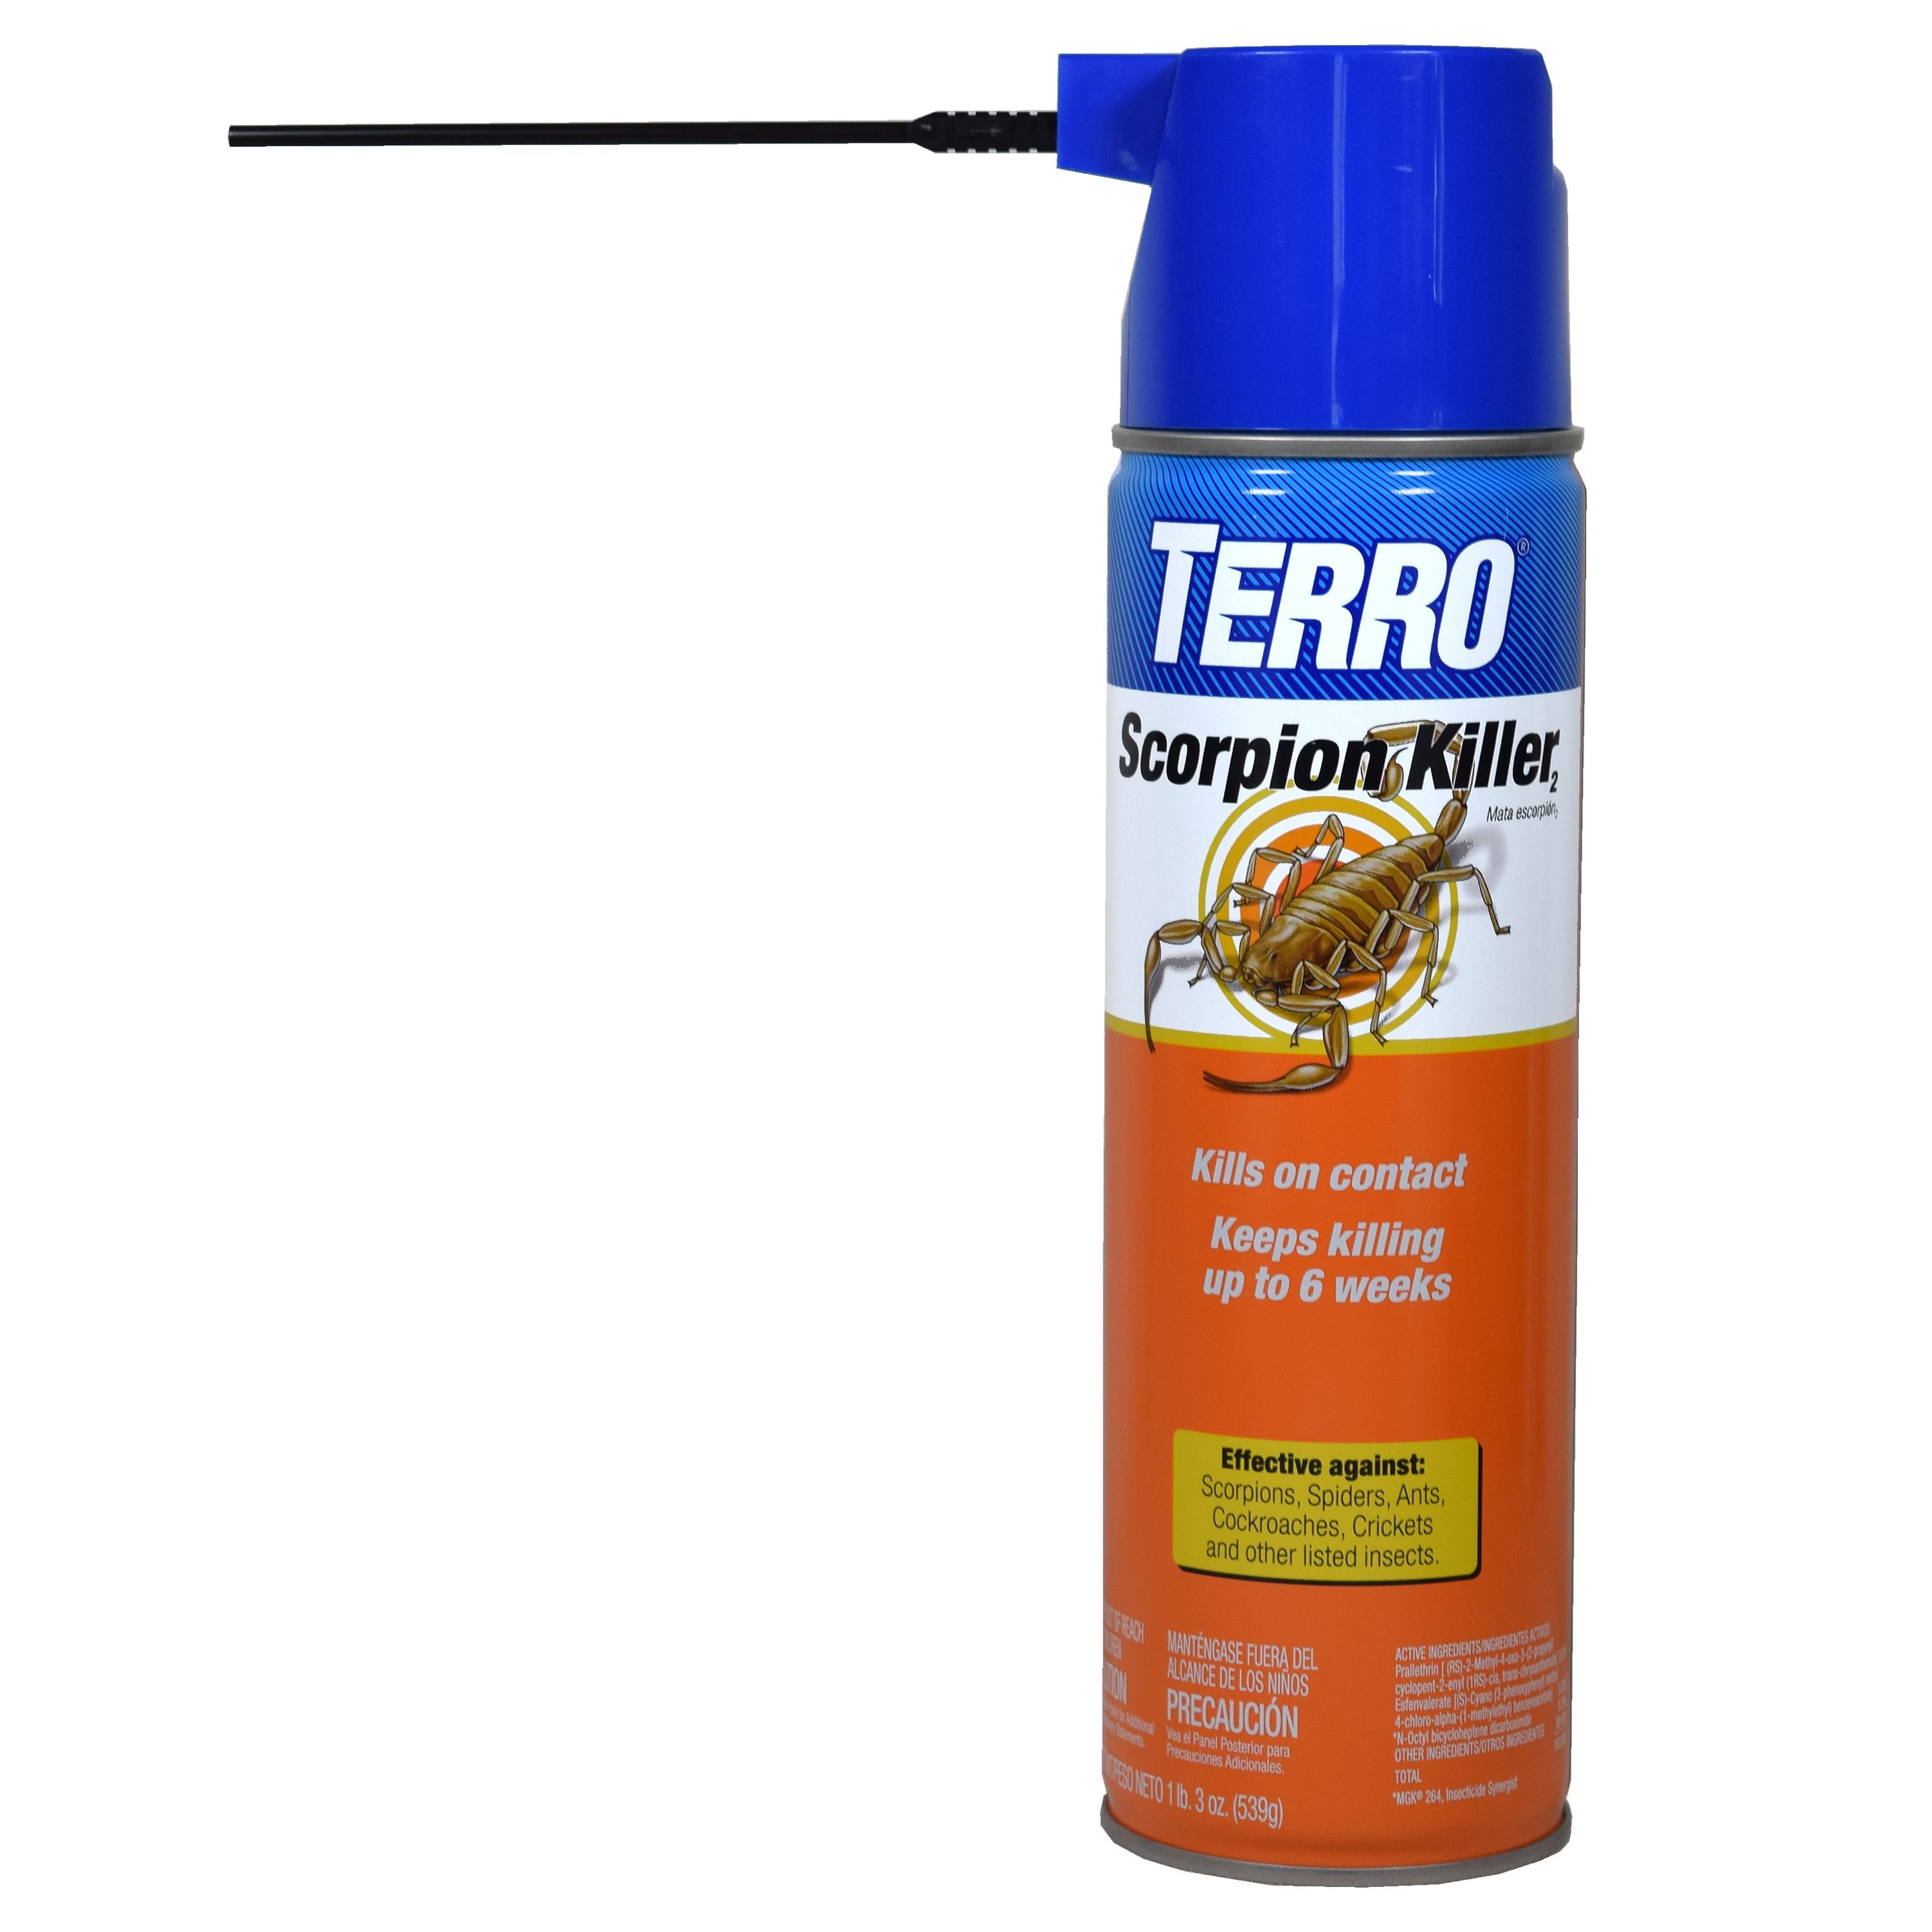 Put an end to scorpions in and around the home with TERRO Scorpion Killer S...